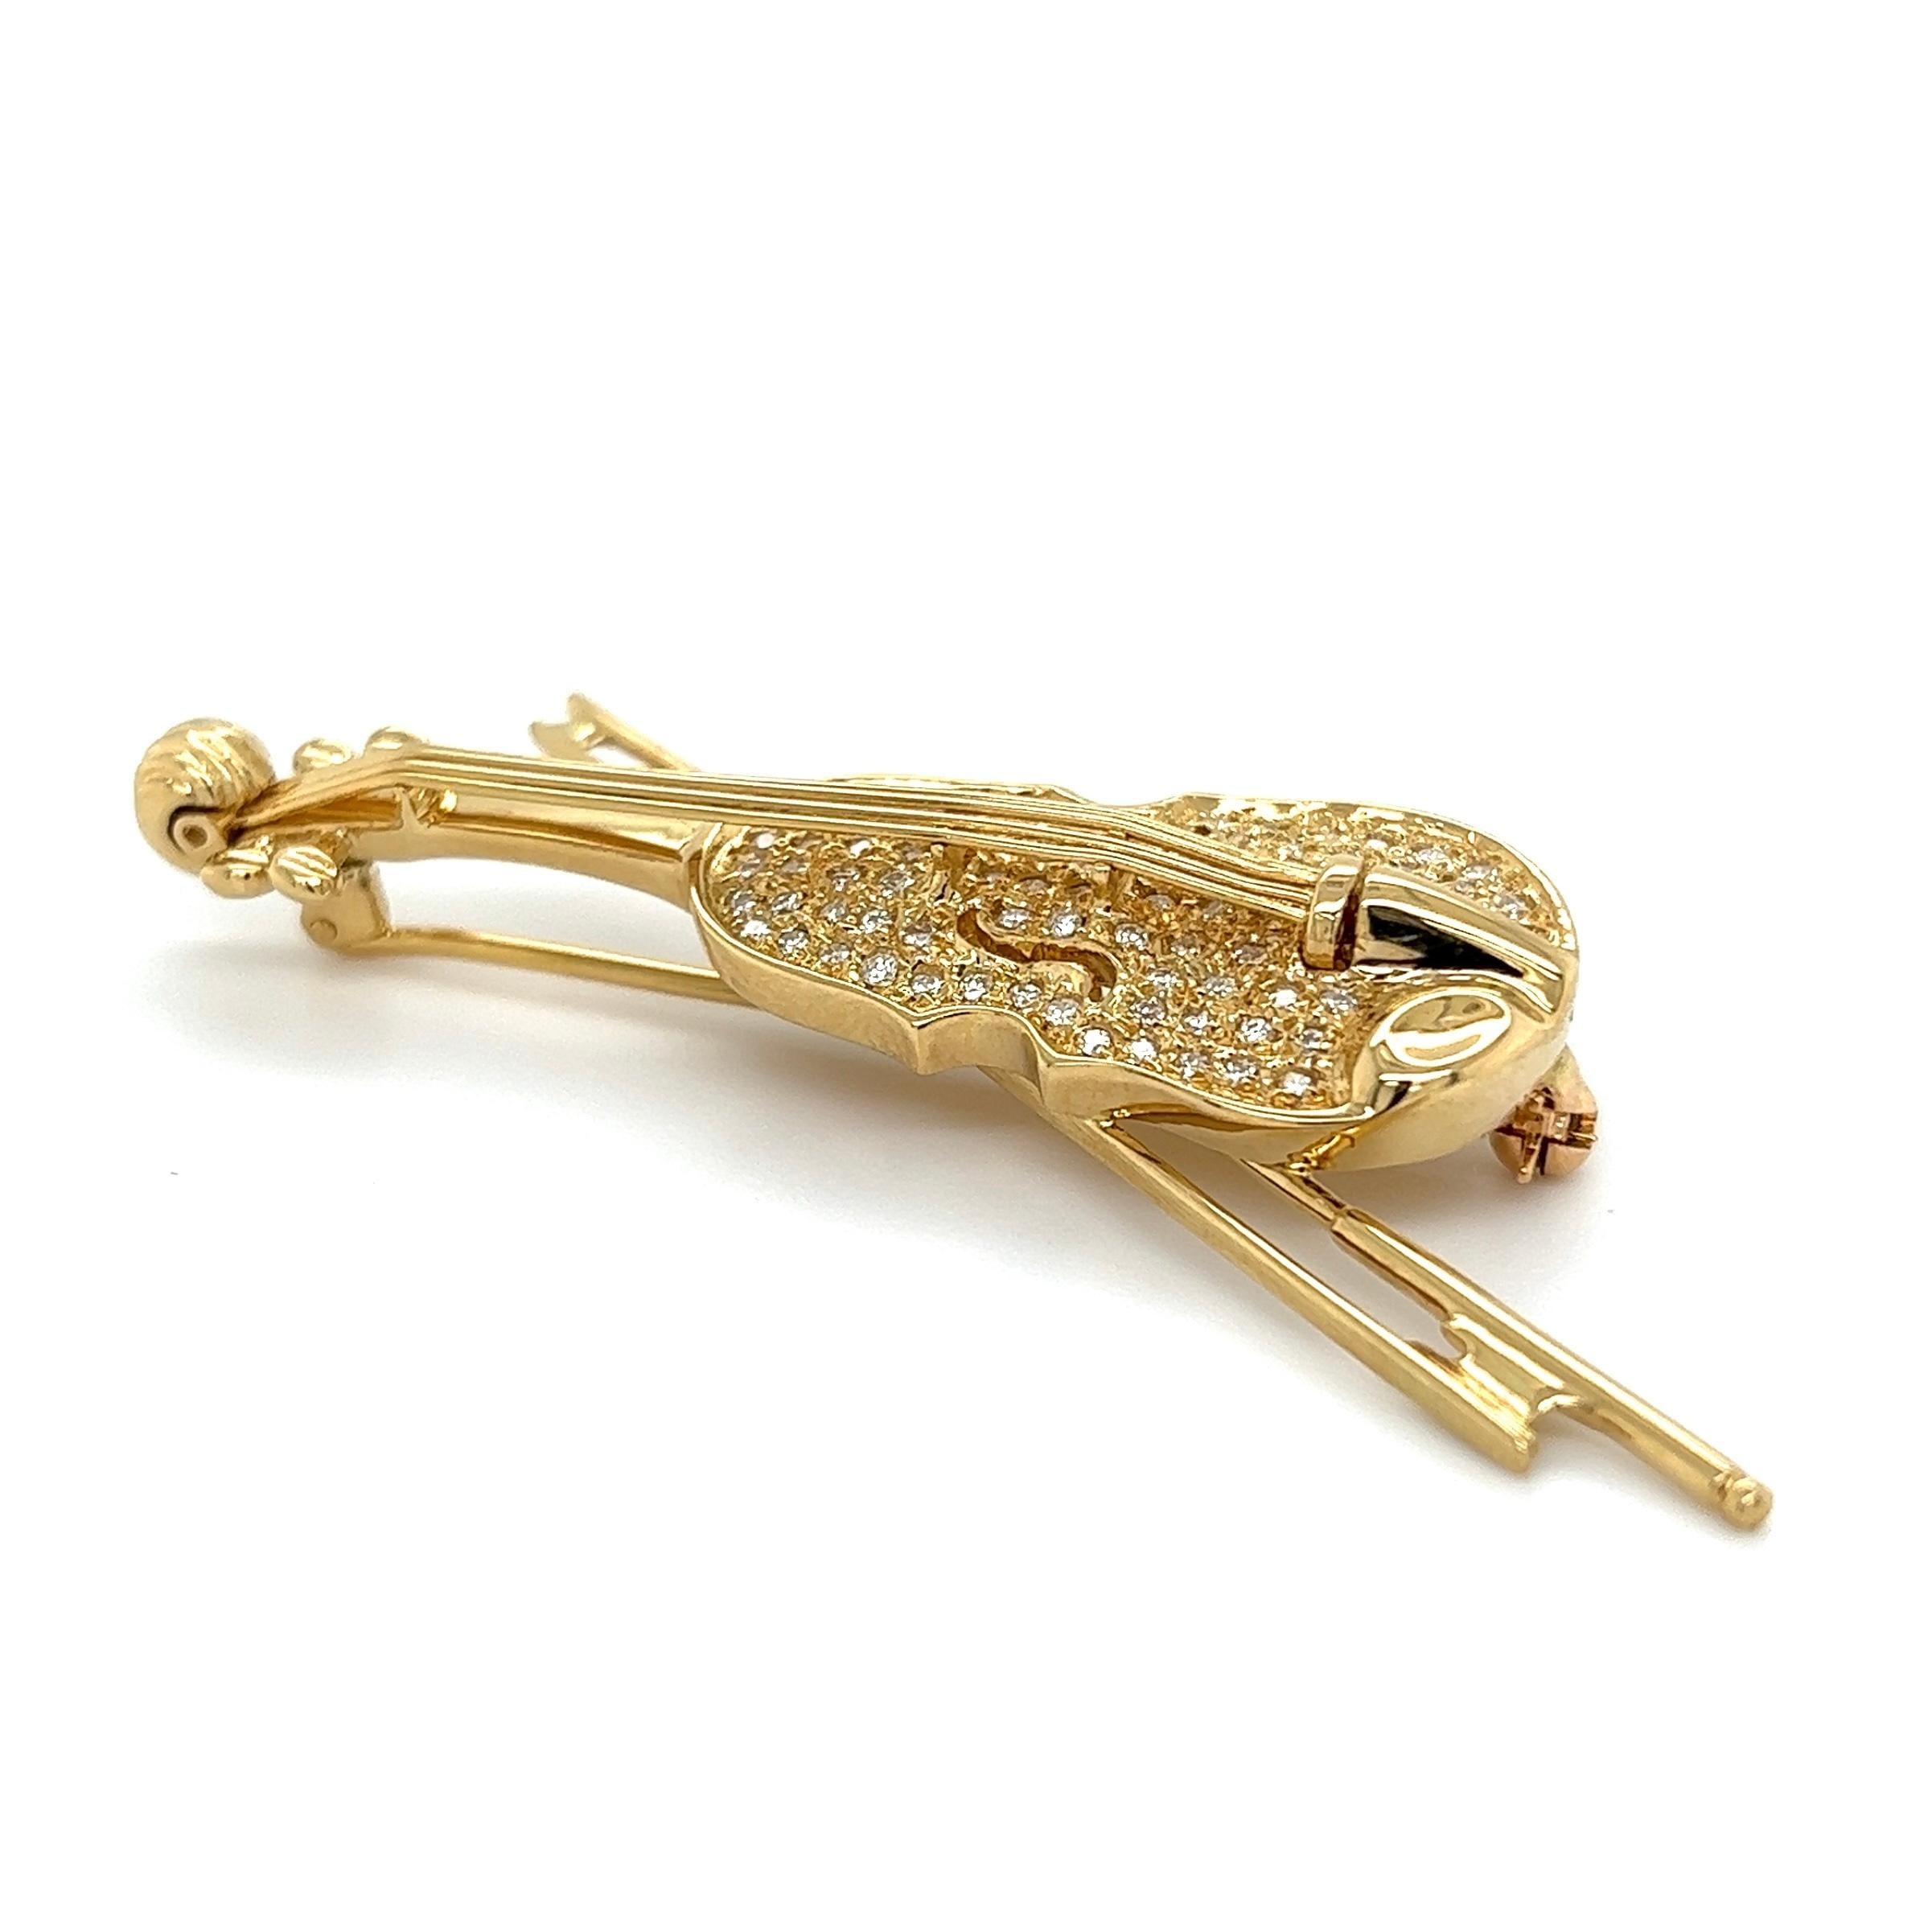 Round Cut Diamond Violin and Bow Gold Vintage Brooch Pin For Sale